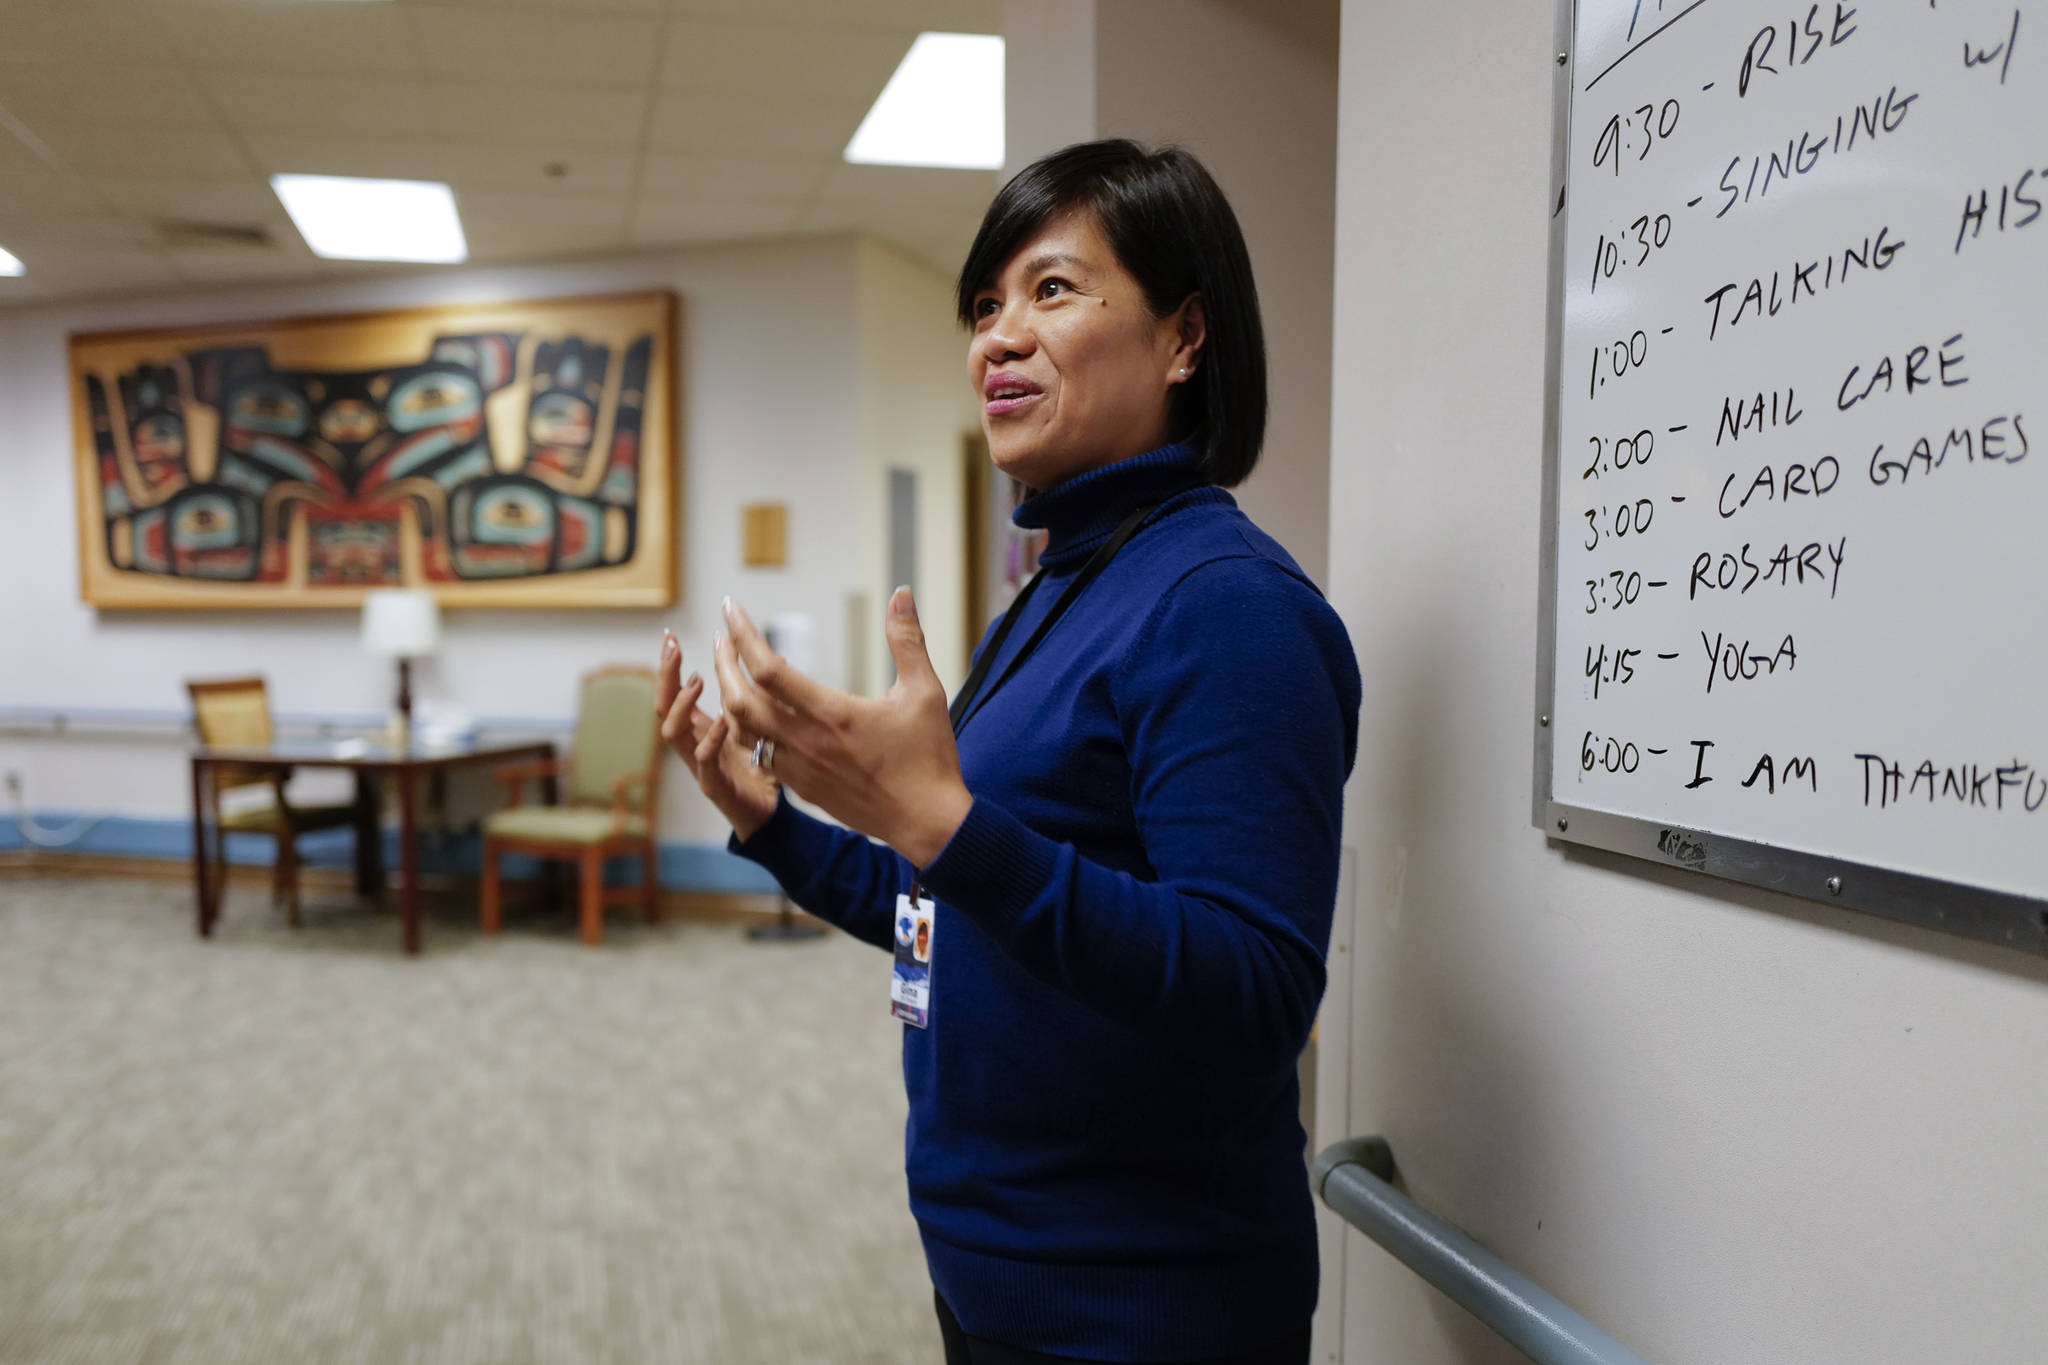 Juneau Pioneer Home Administrator Gina Del Rosario gives a tour of the Juneau Pioneer Home on Thursday, Nov. 14, 2019. (Michael Penn | Juneau Empire)